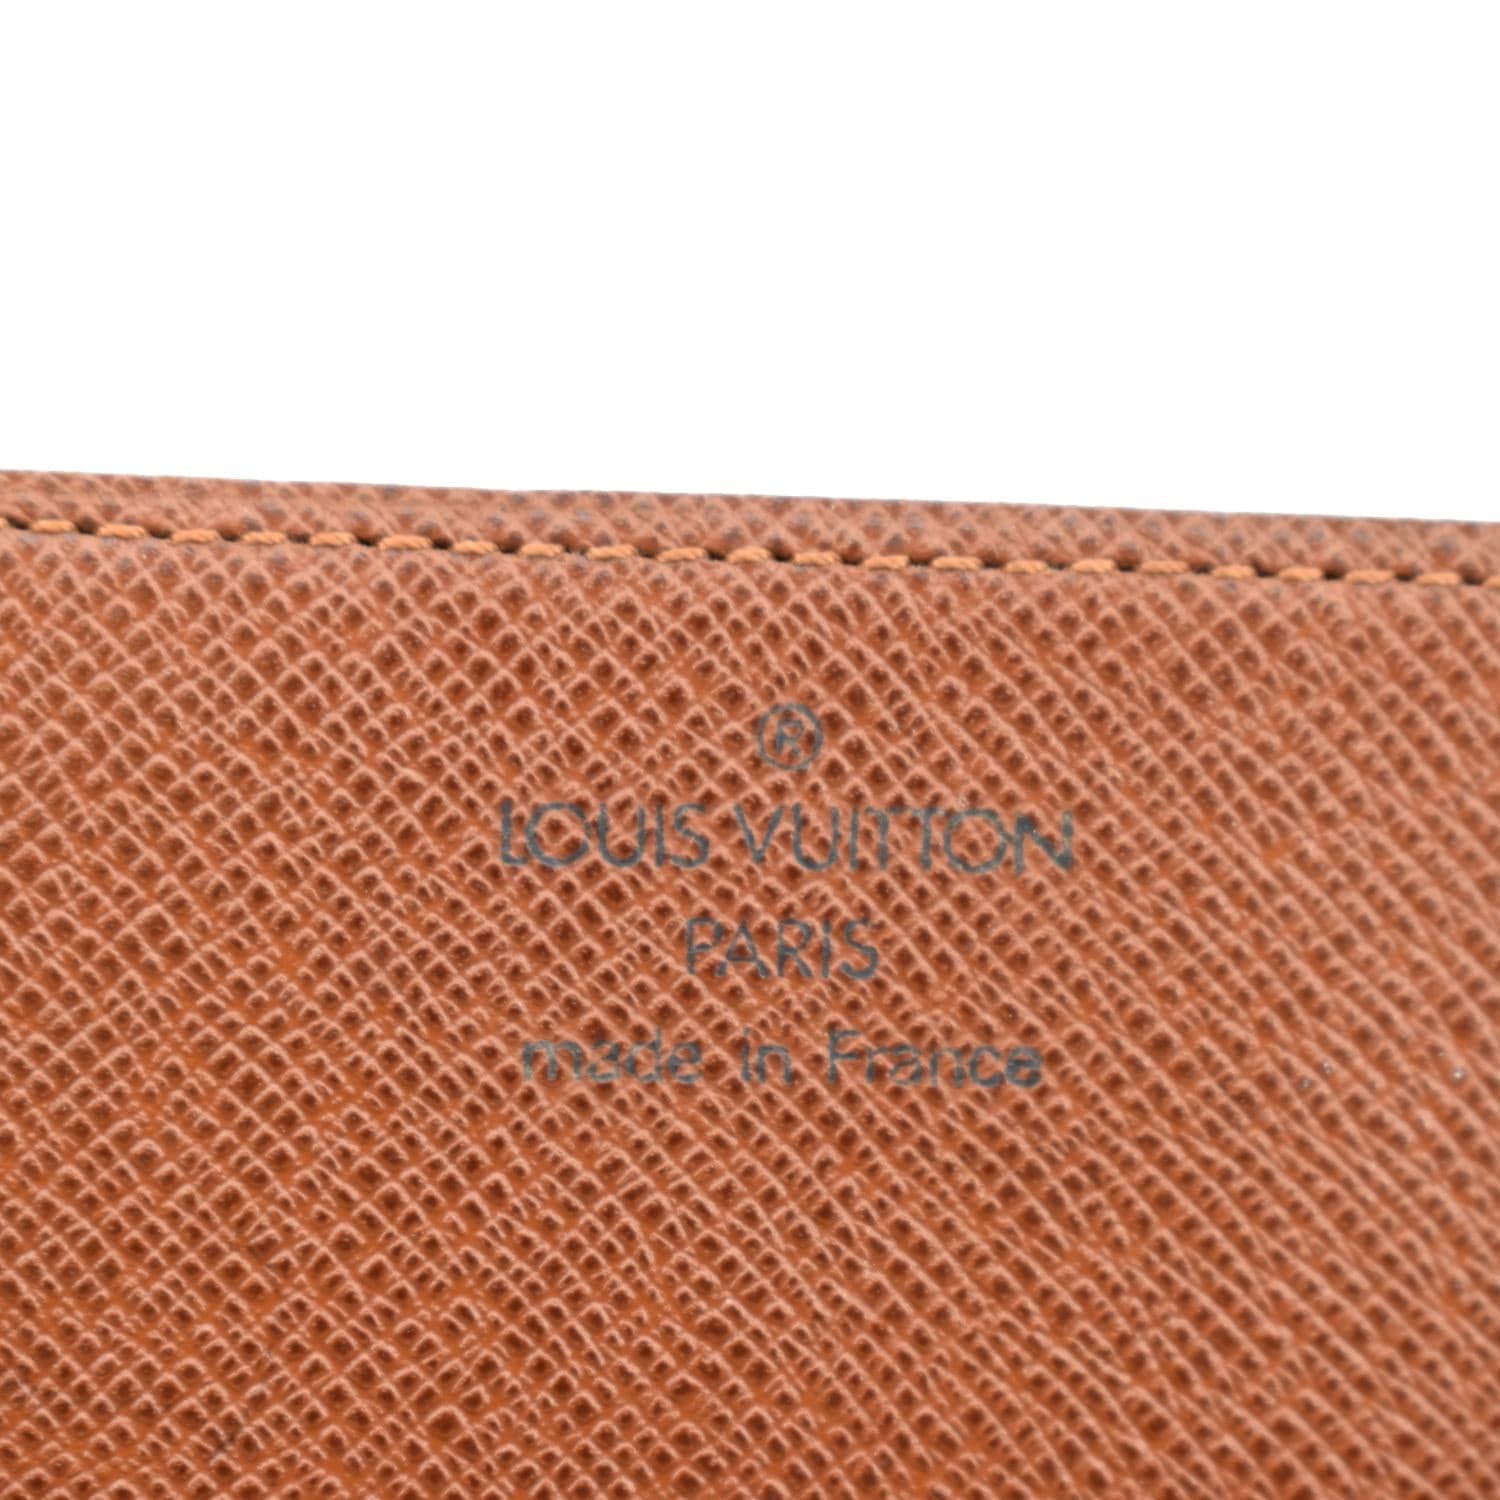 Business Card Holder Damier Azur Canvas - Wallets and Small